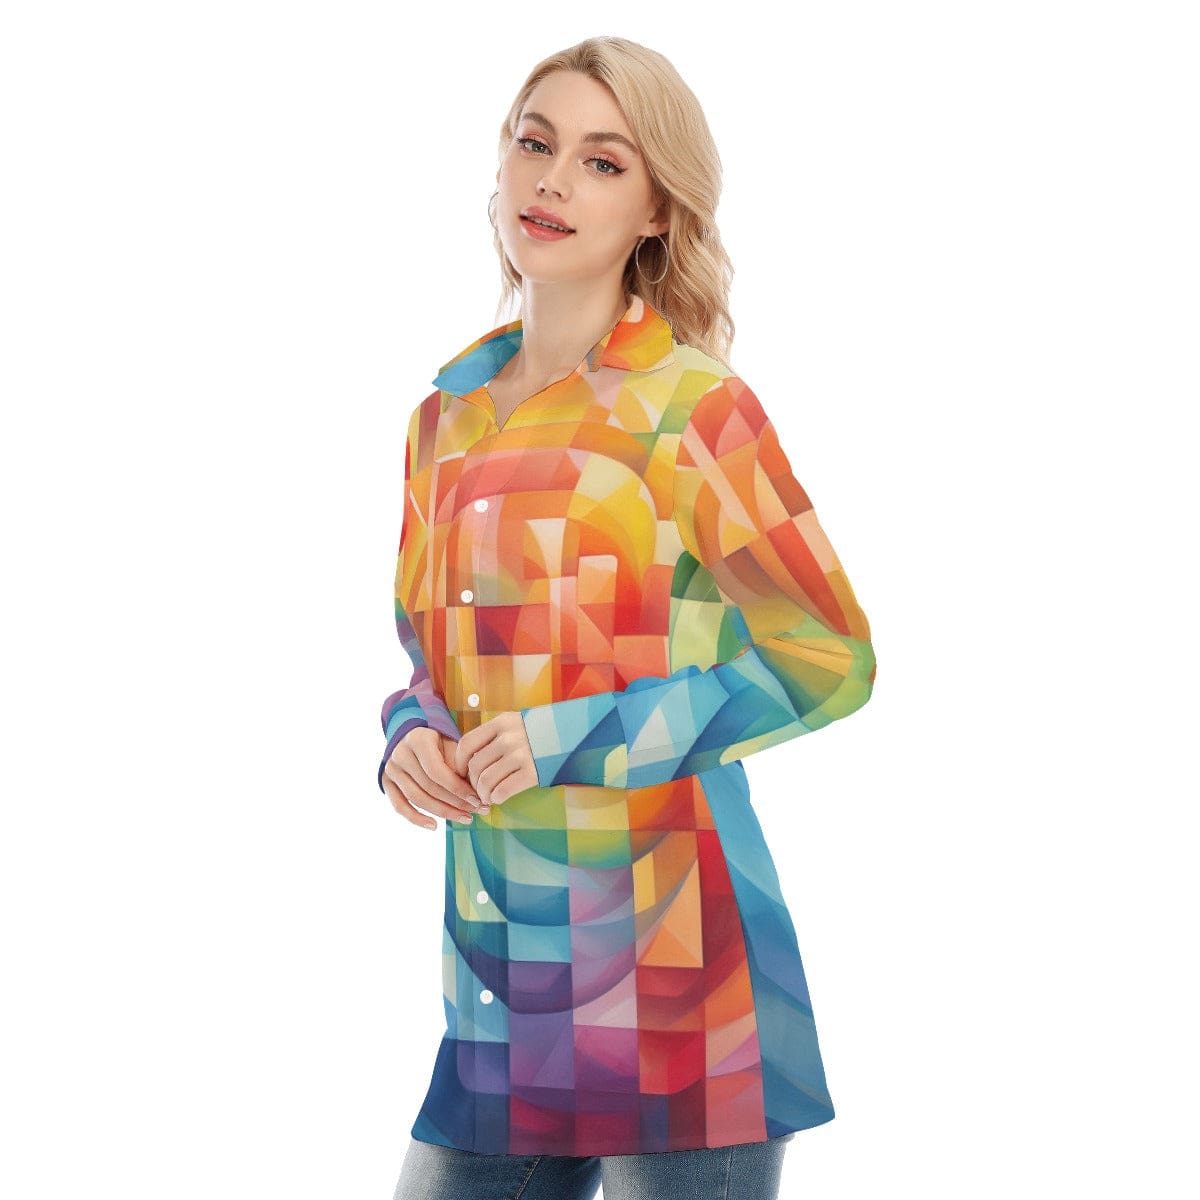 3R9EQ All-Over Print Women's Long Shirt |115GSM98% Cotton and 2% spandex